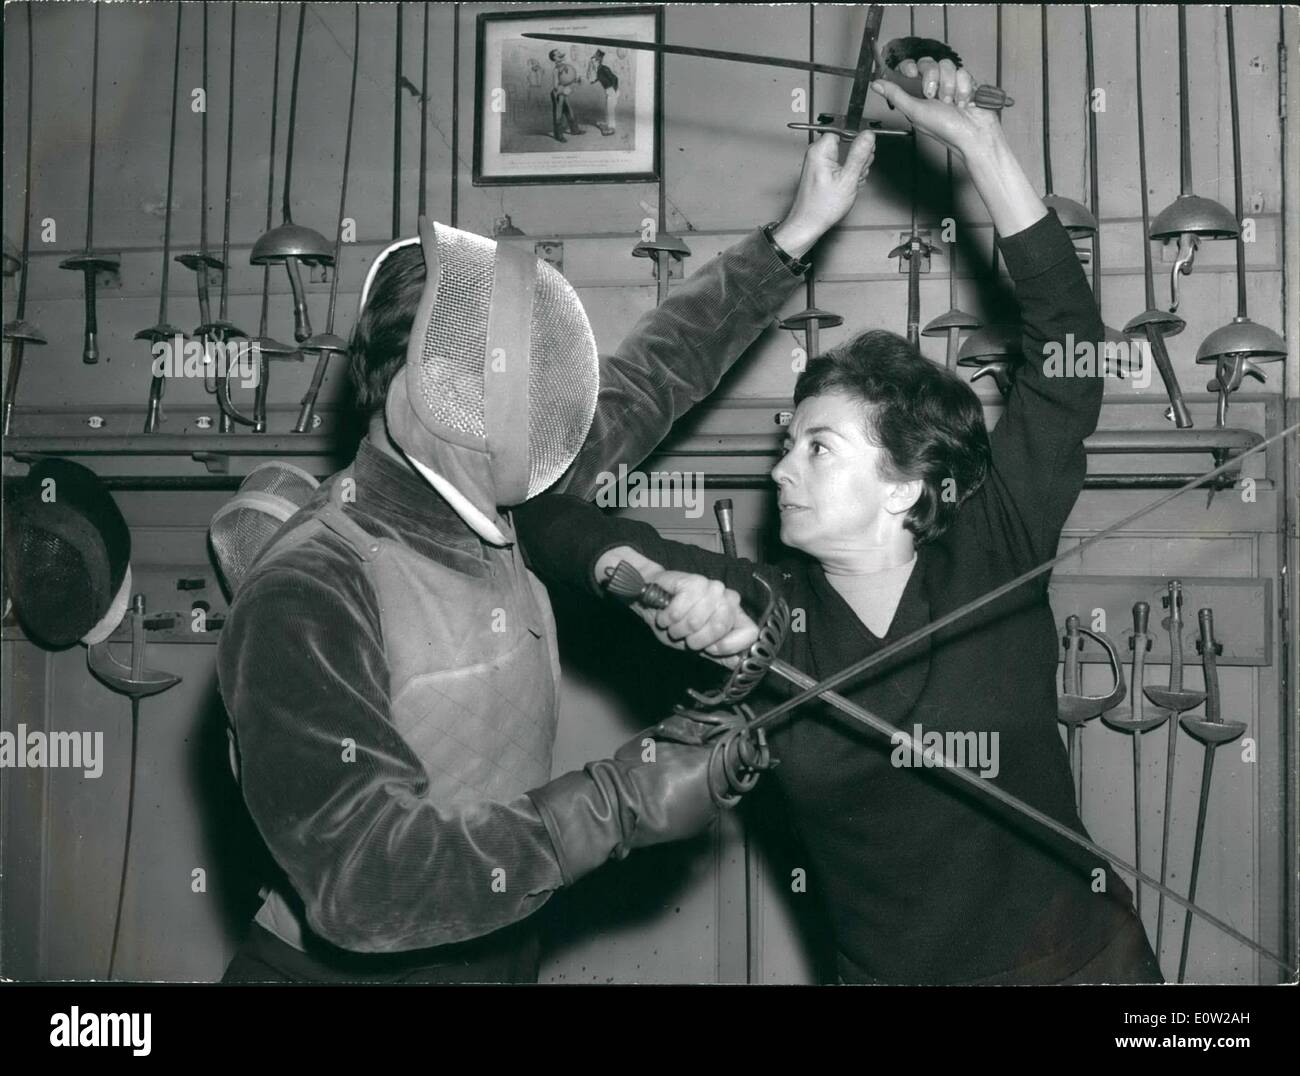 Feb. 02, 1961 - Famous Actress talks up Fencing.: Suzanne Flon, the famous French Actress , has been talking Fencing lessons for her next role in the Kings Night to be staged at Vieux-Colombiers. Photo Shows Suzanne Colombier fencing with her trainer. Stock Photo